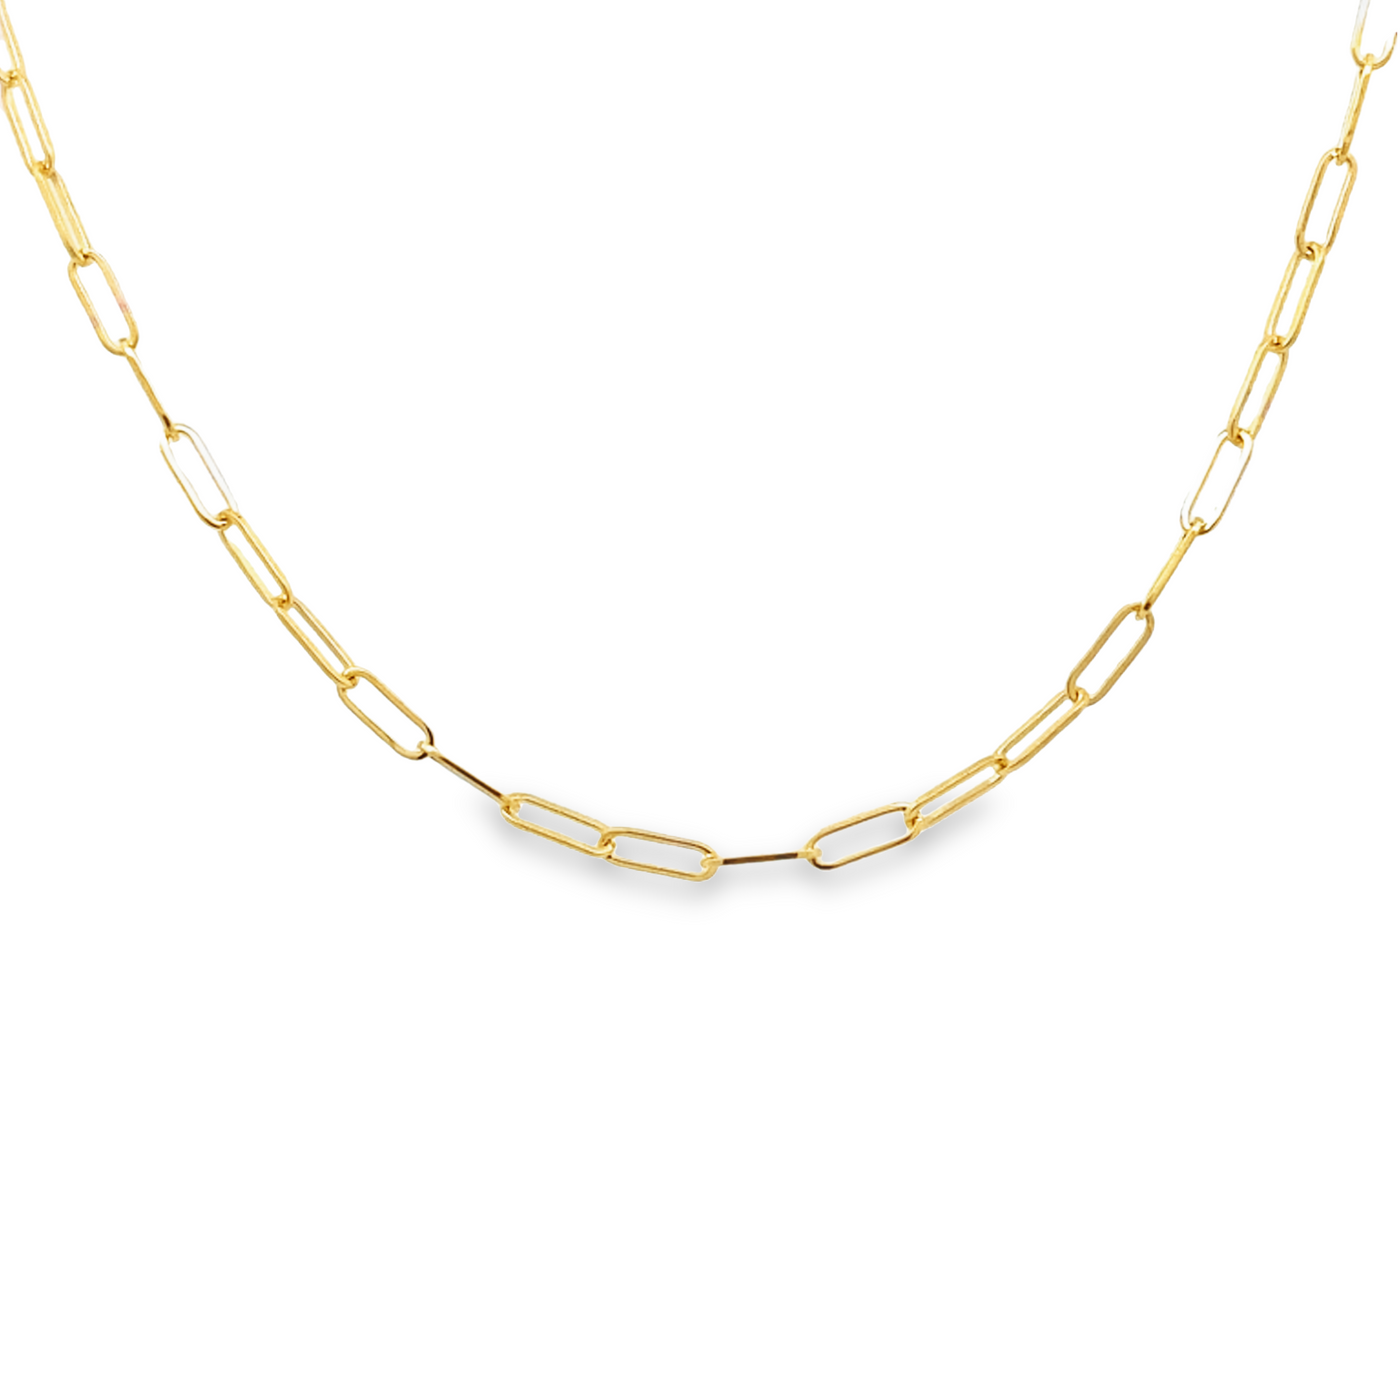 10 Karat Yellow Thin Gold Paperclip Necklace